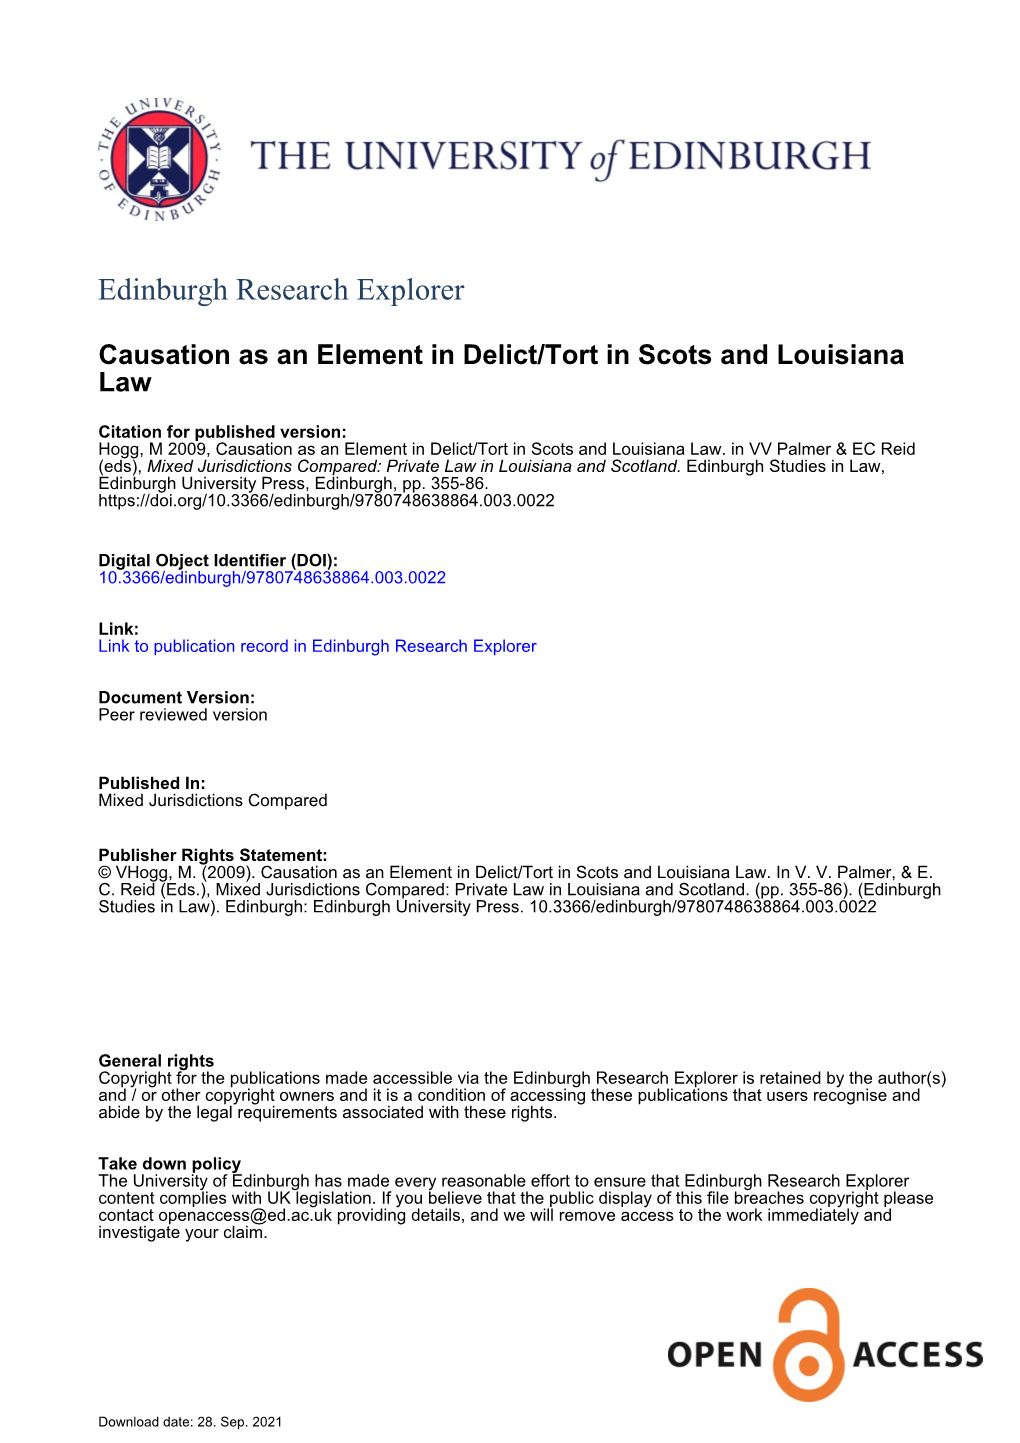 Causation in Delict in Scots and Louisianan